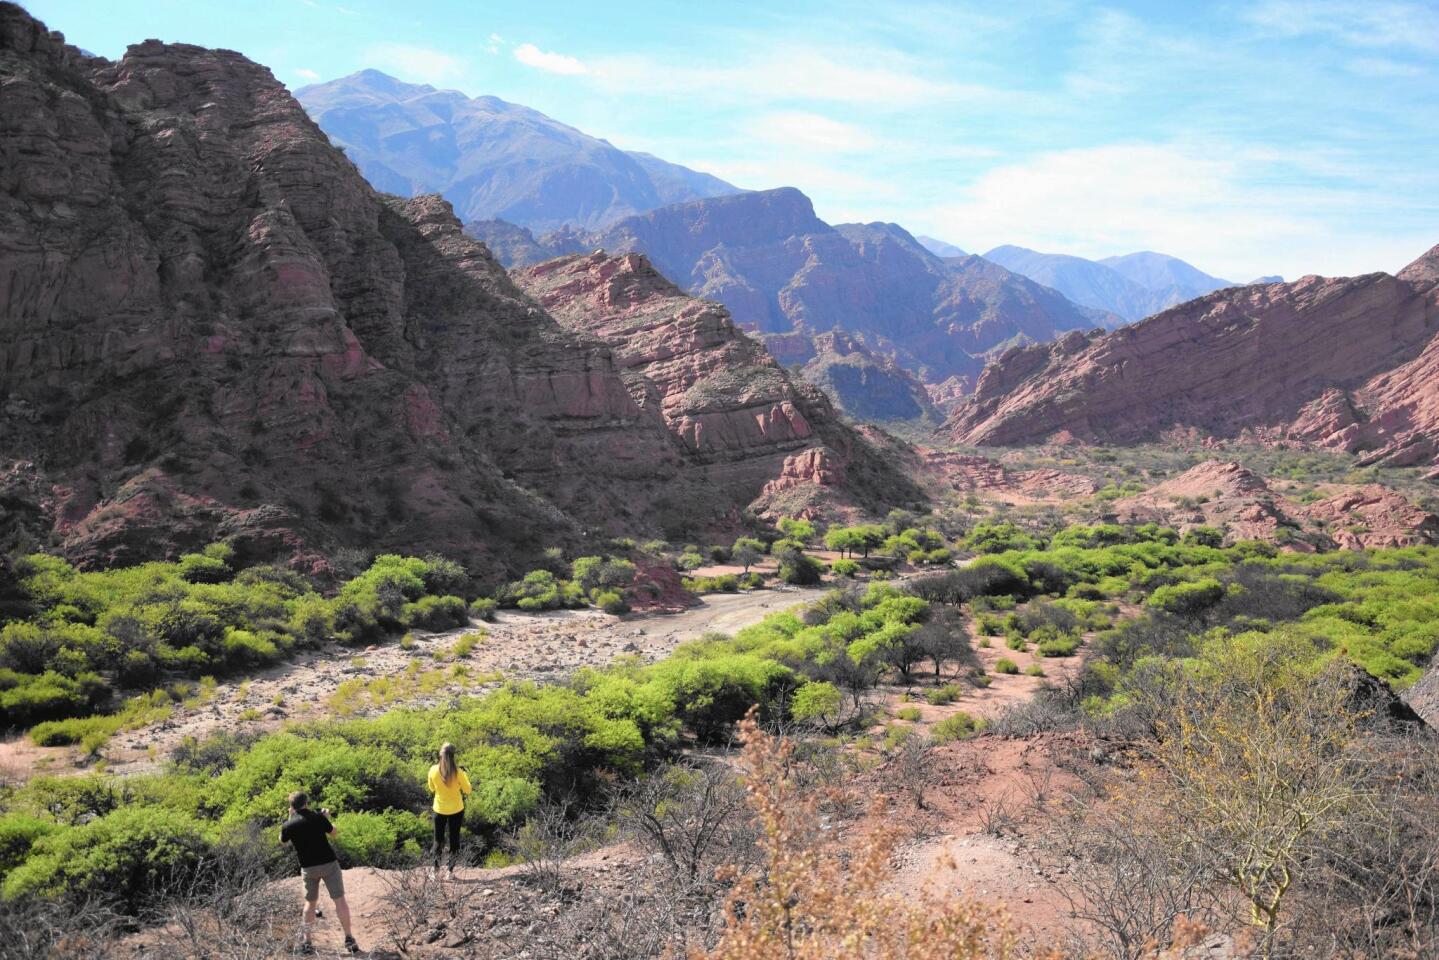 The Calchaqui Valley in northwest Argentina is a hiker’s paradise. Wine lovers have plenty to like here too.